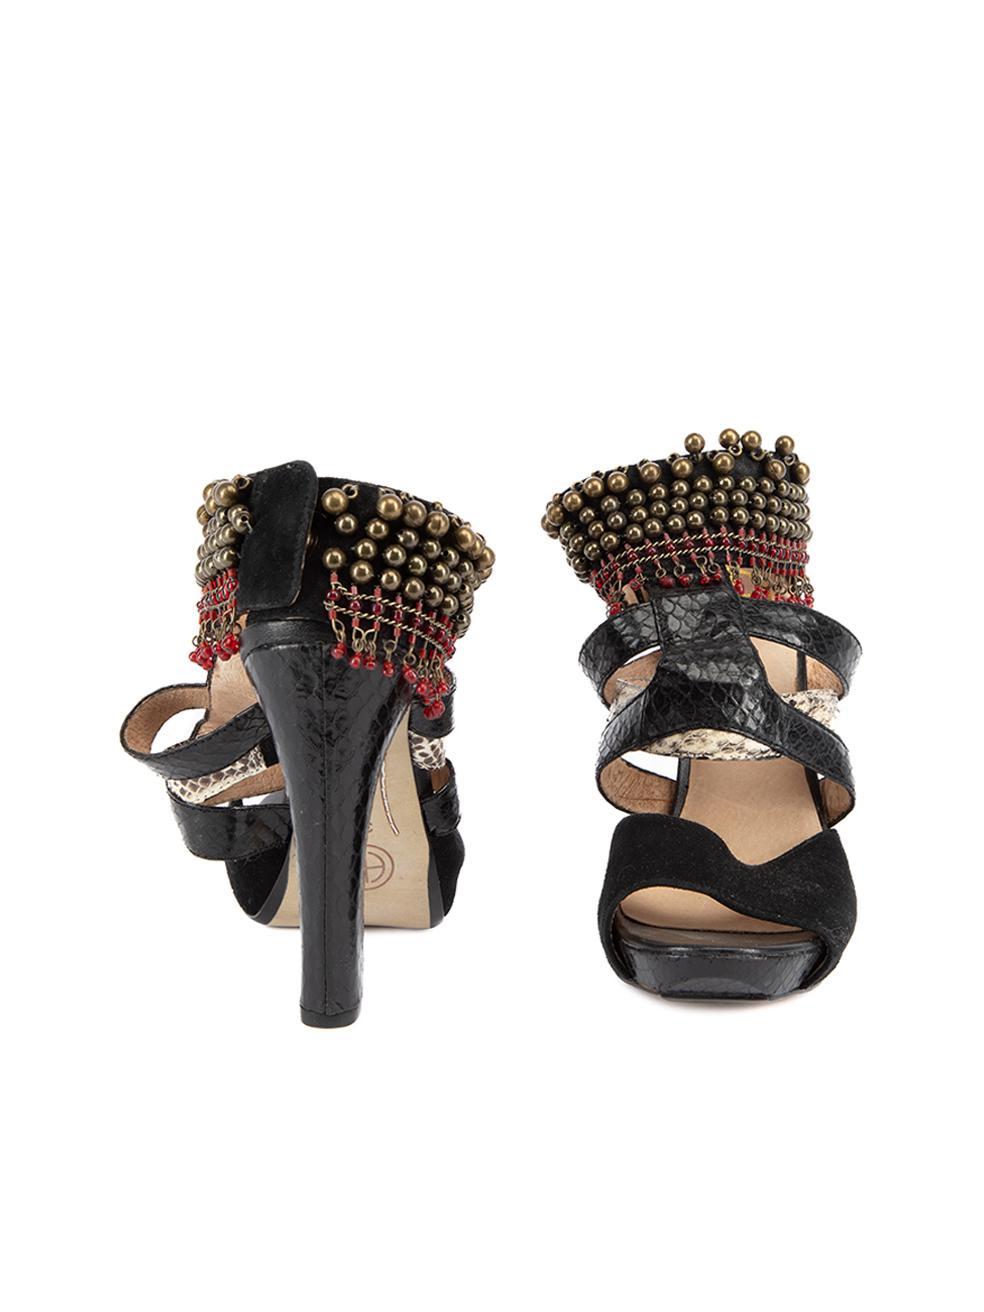 Pre-Loved House Of Harlow 1960 Women's Beads Embellished Ankle Strap Heel Sandal In Good Condition For Sale In London, GB